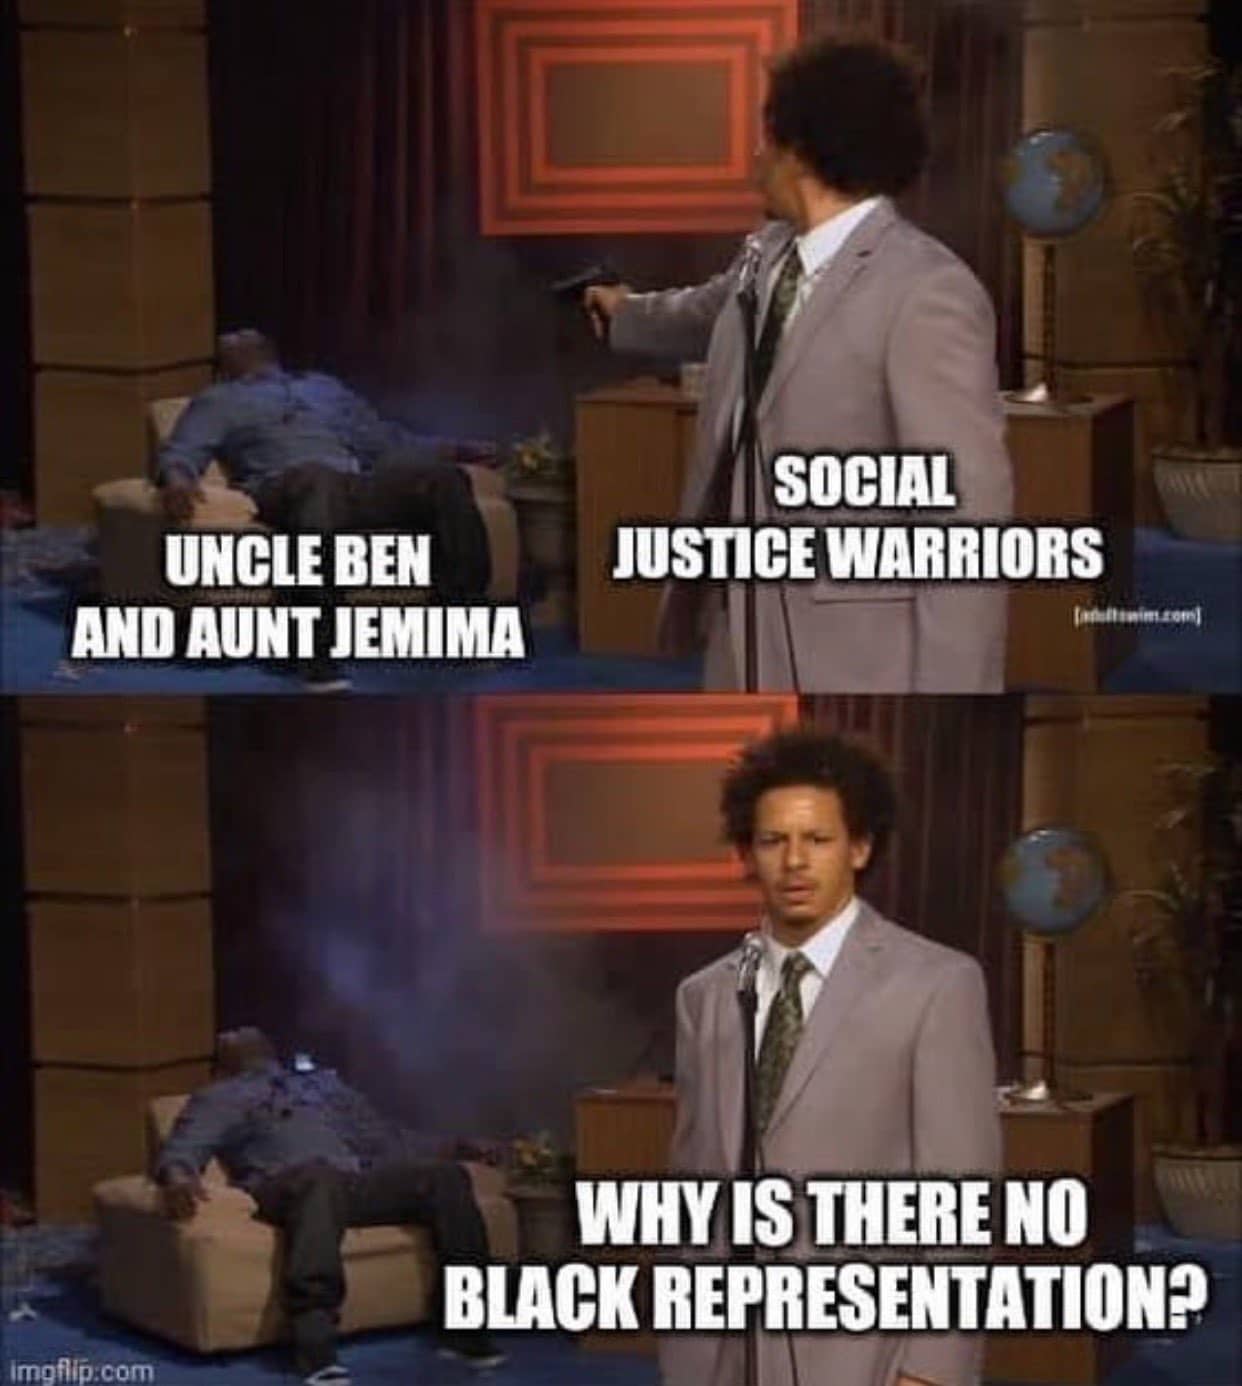 Political, Thanks, Radio boomer memes Political, Thanks, Radio text: SOCIAL JUSTICE WARRIORS UNCLEBEN AND AUNTJEMIMA WHYISTHERENO irngfli#.com 